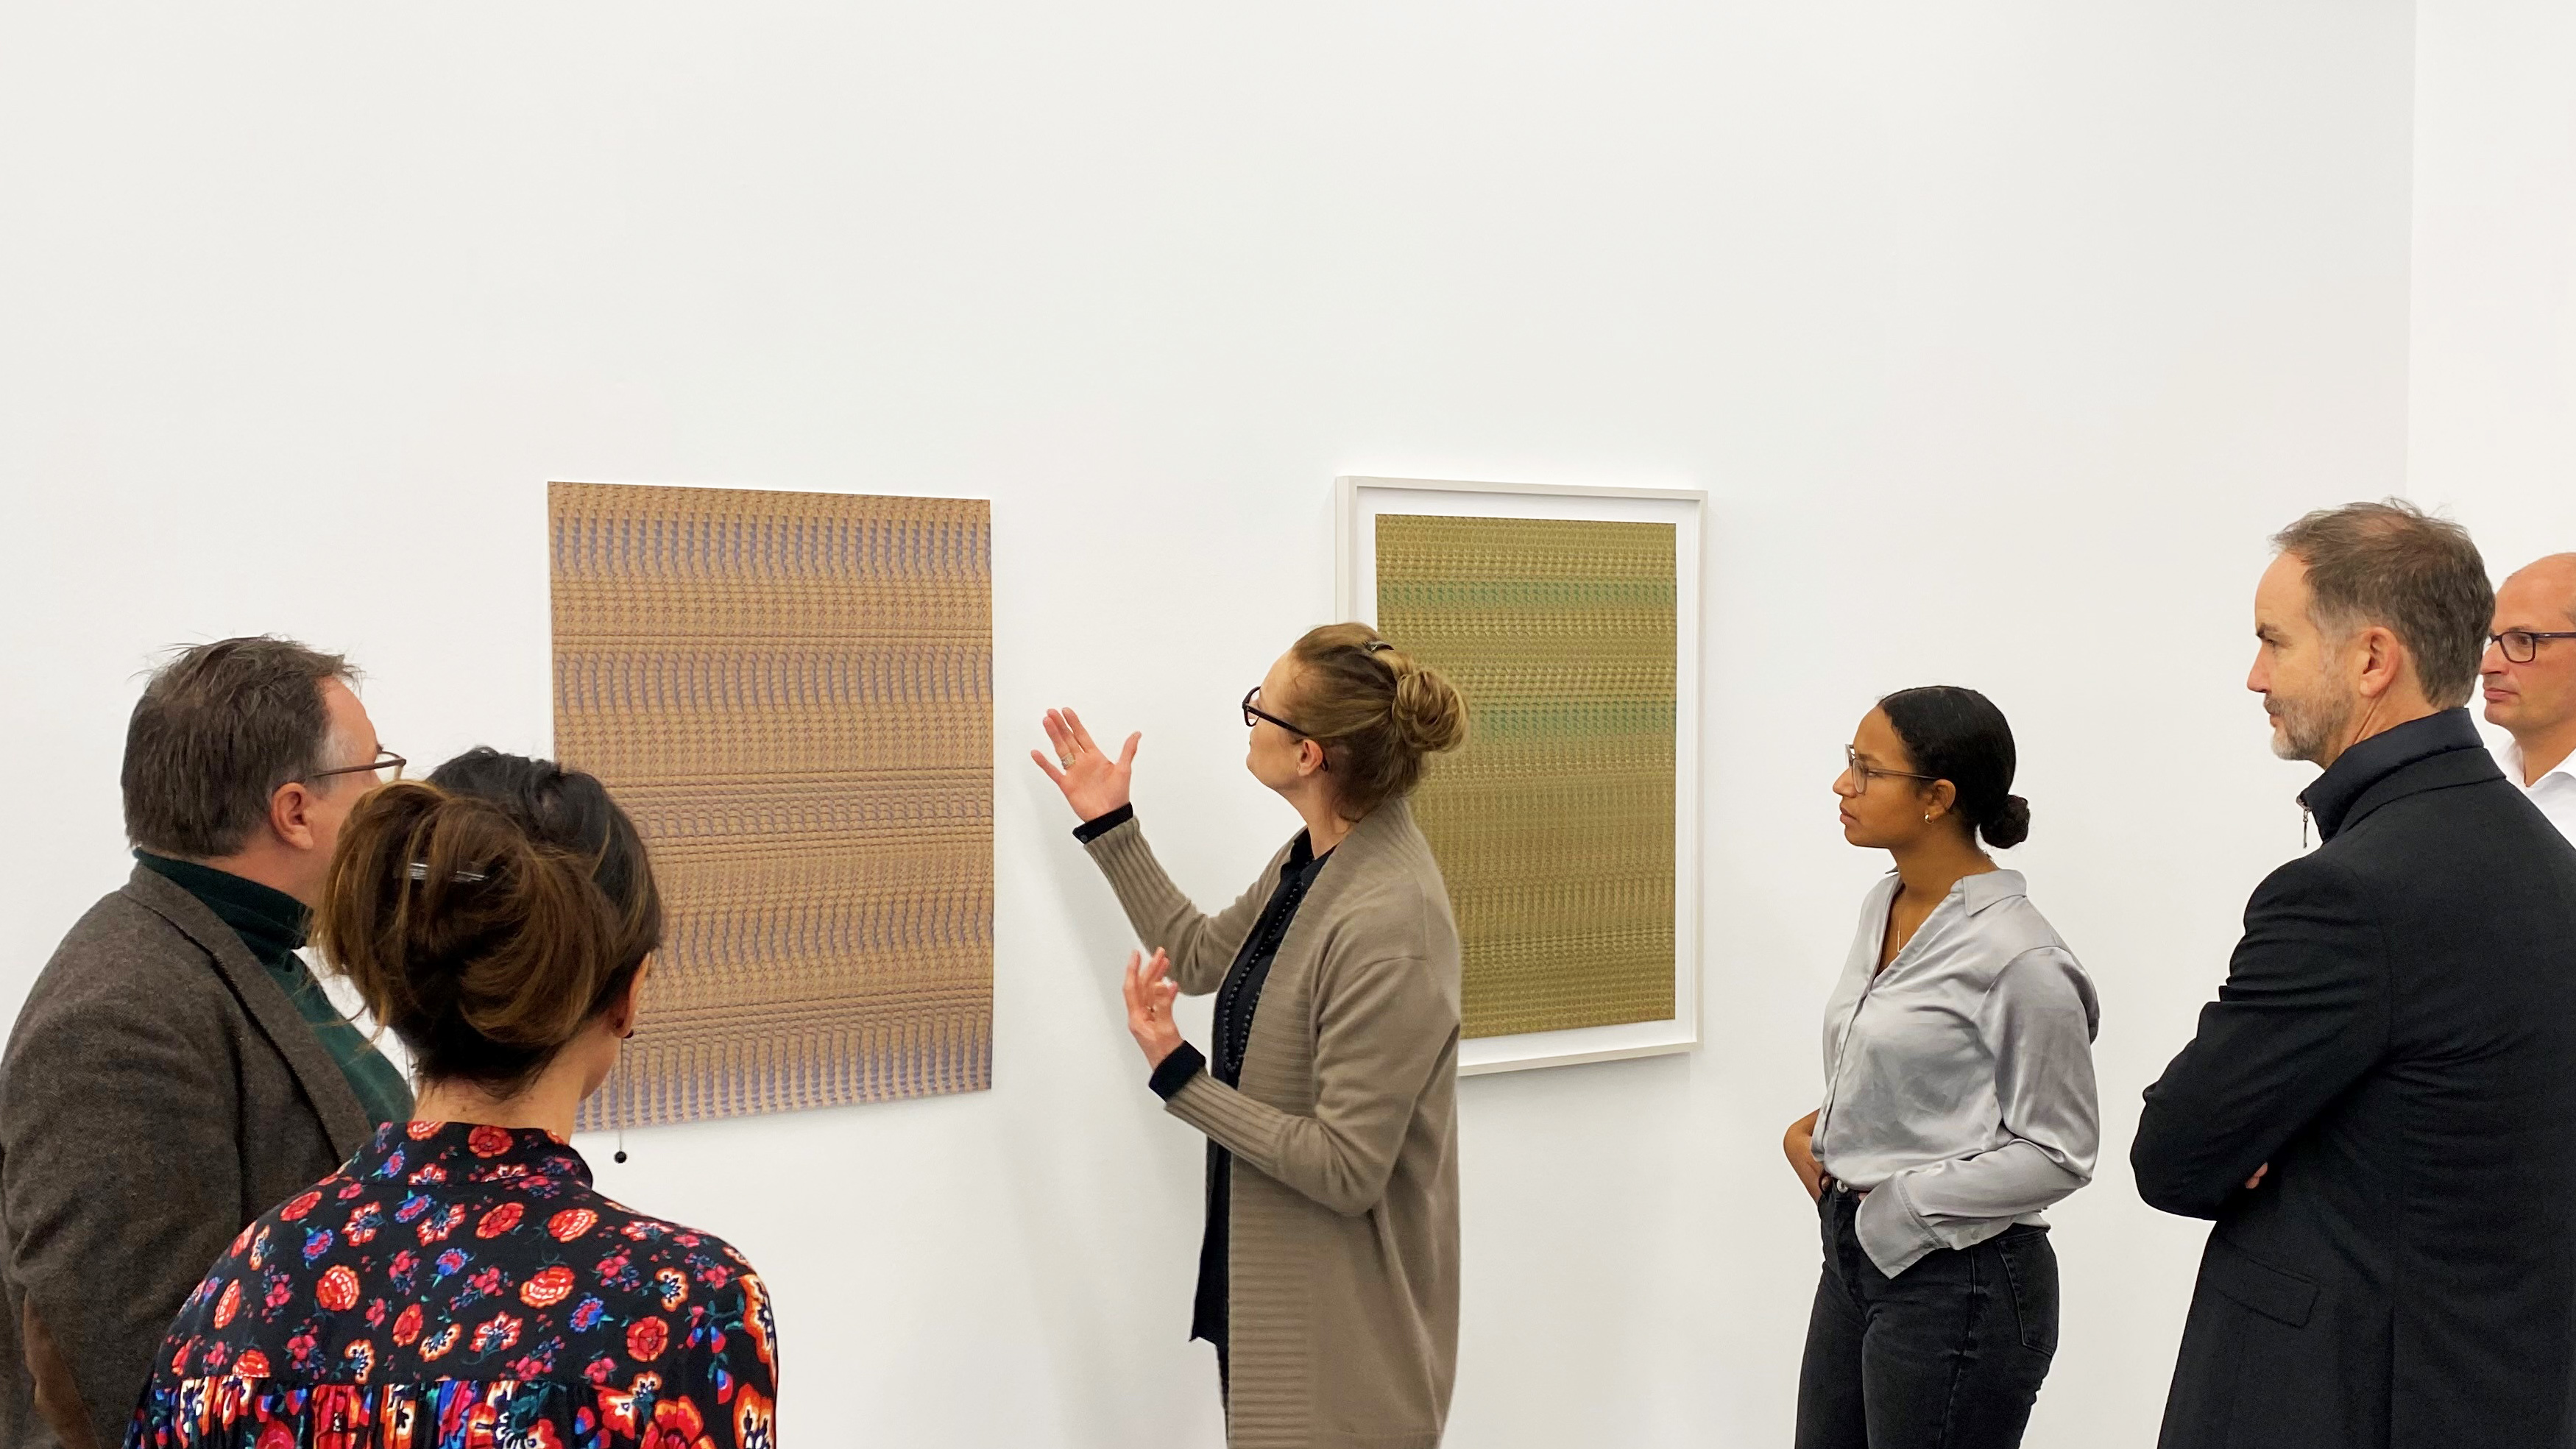 Exhibition M+M | Warp and Weft at Munich Re Art Gallery  | Guided Tour